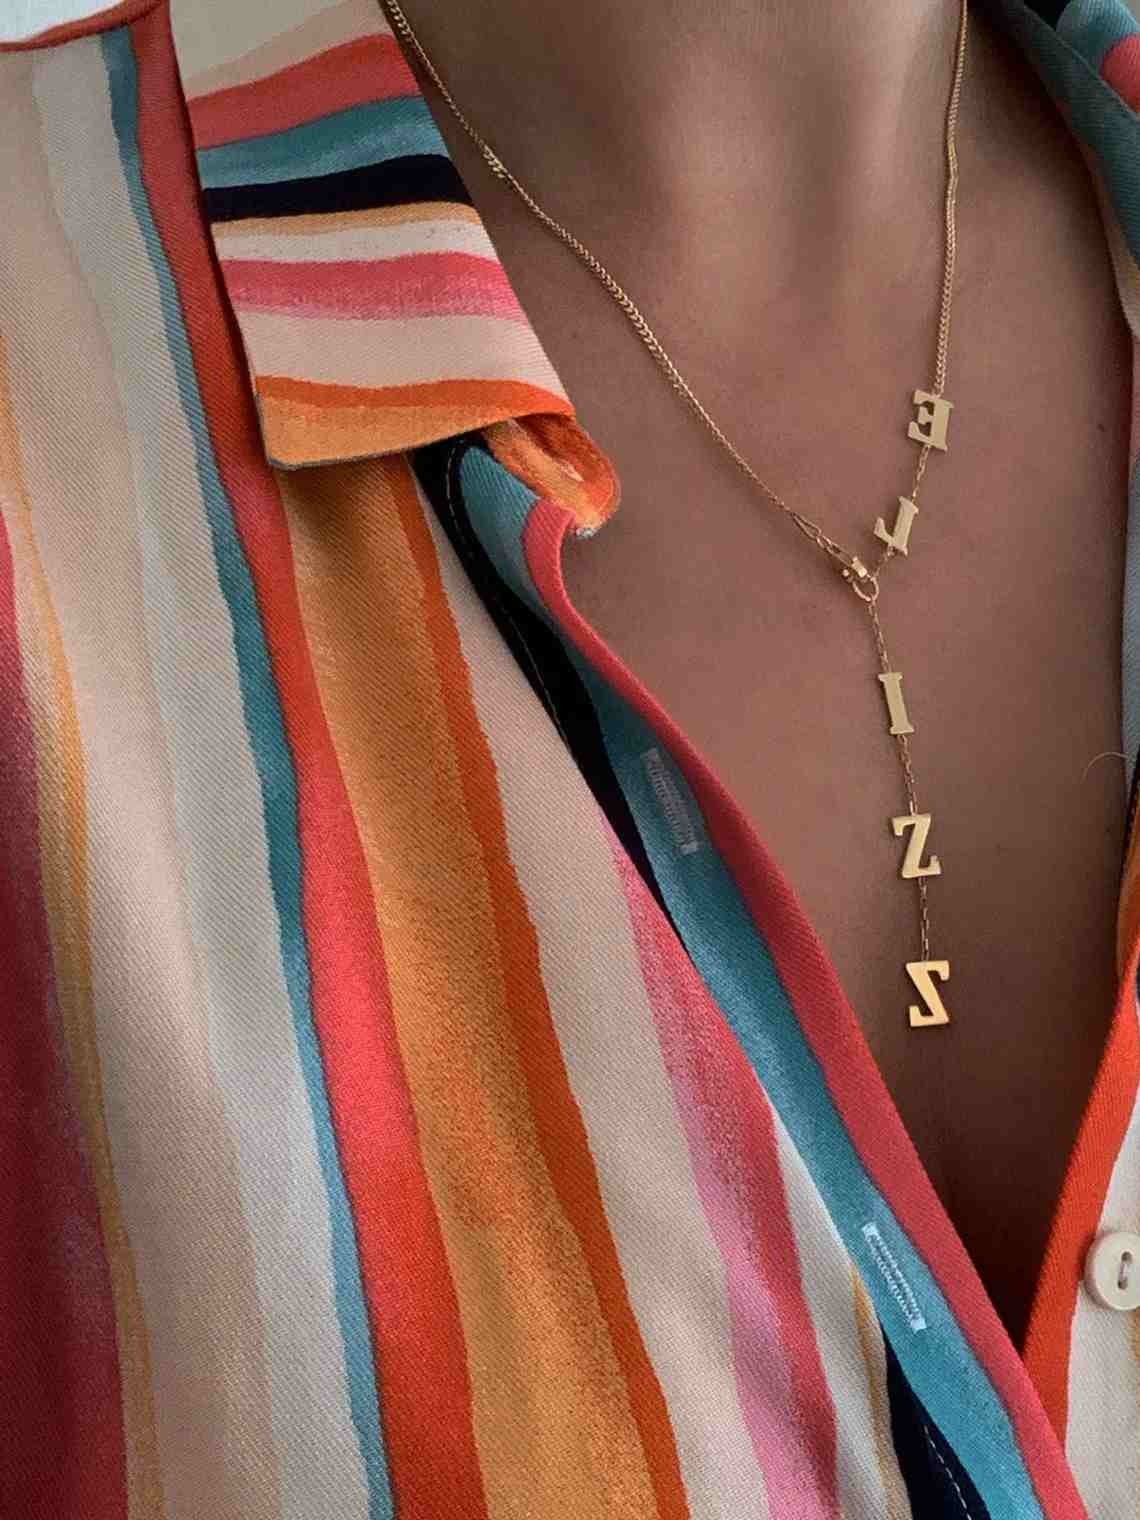 ❤️Buy 2 FREE SHIPPING❤️Lariat Y Shaped Necklace in Gold| Letter Name Necklace|